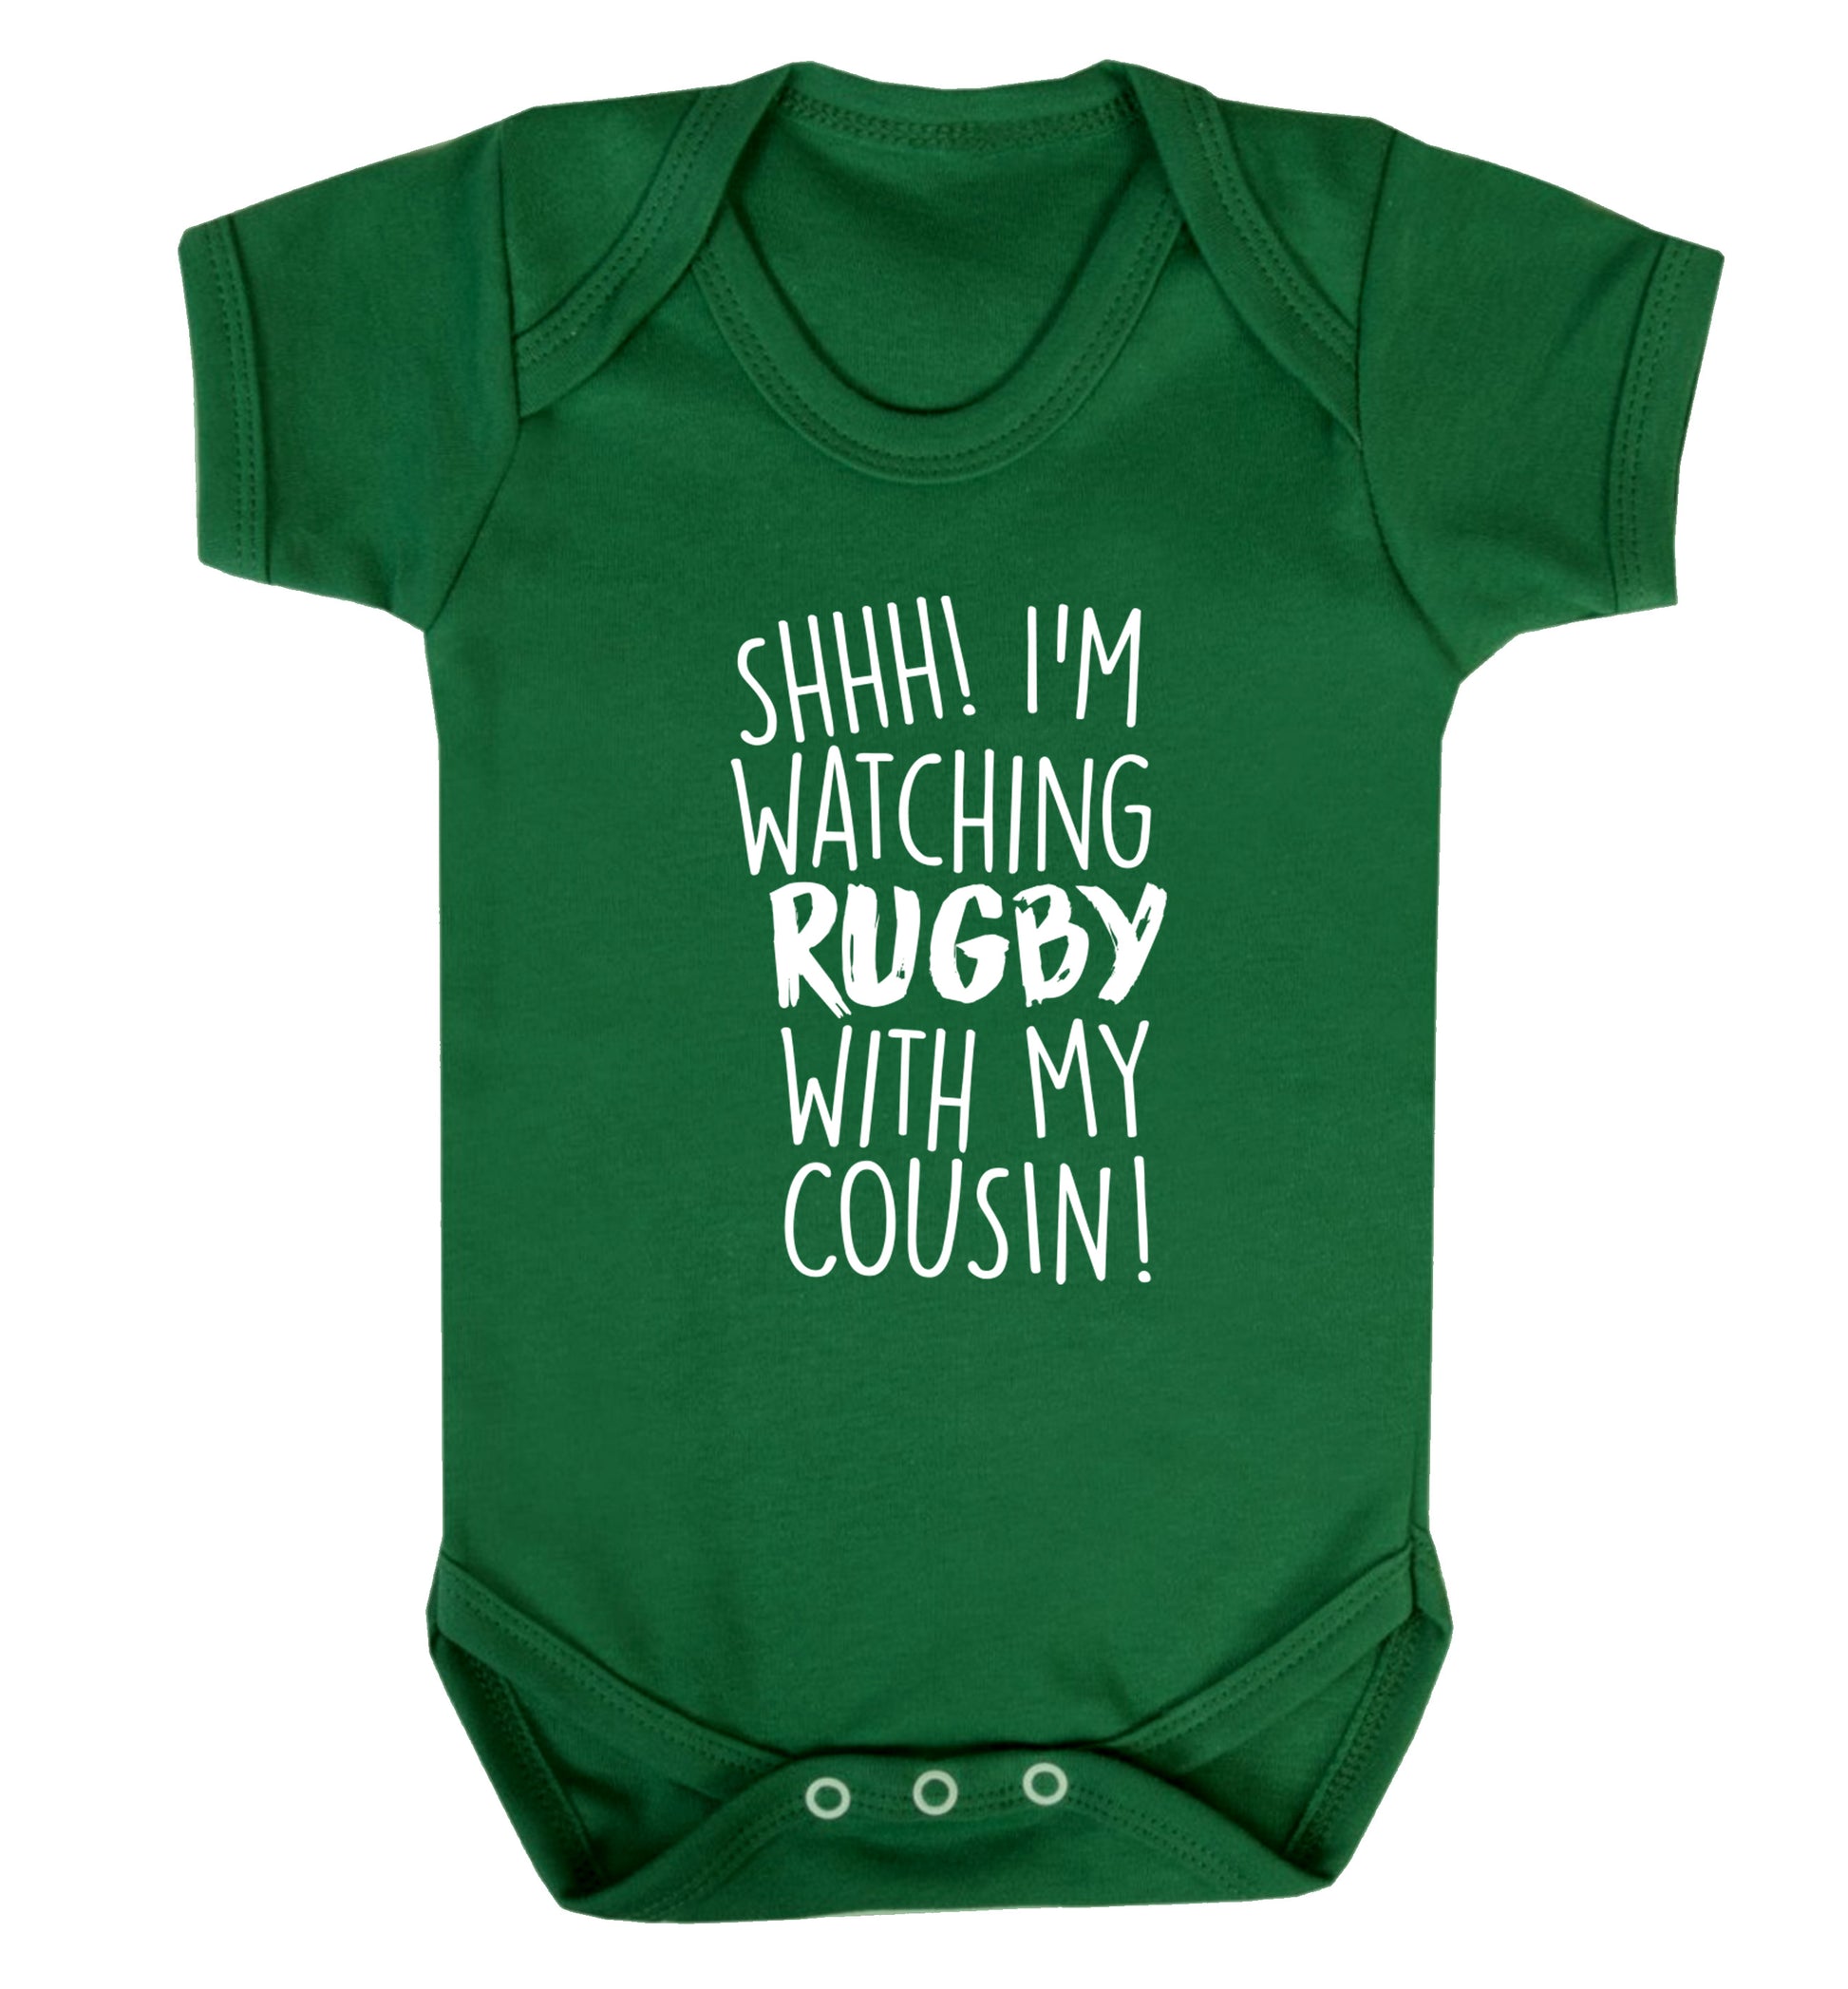 Shhh I'm watching rugby with my cousin Baby Vest green 18-24 months